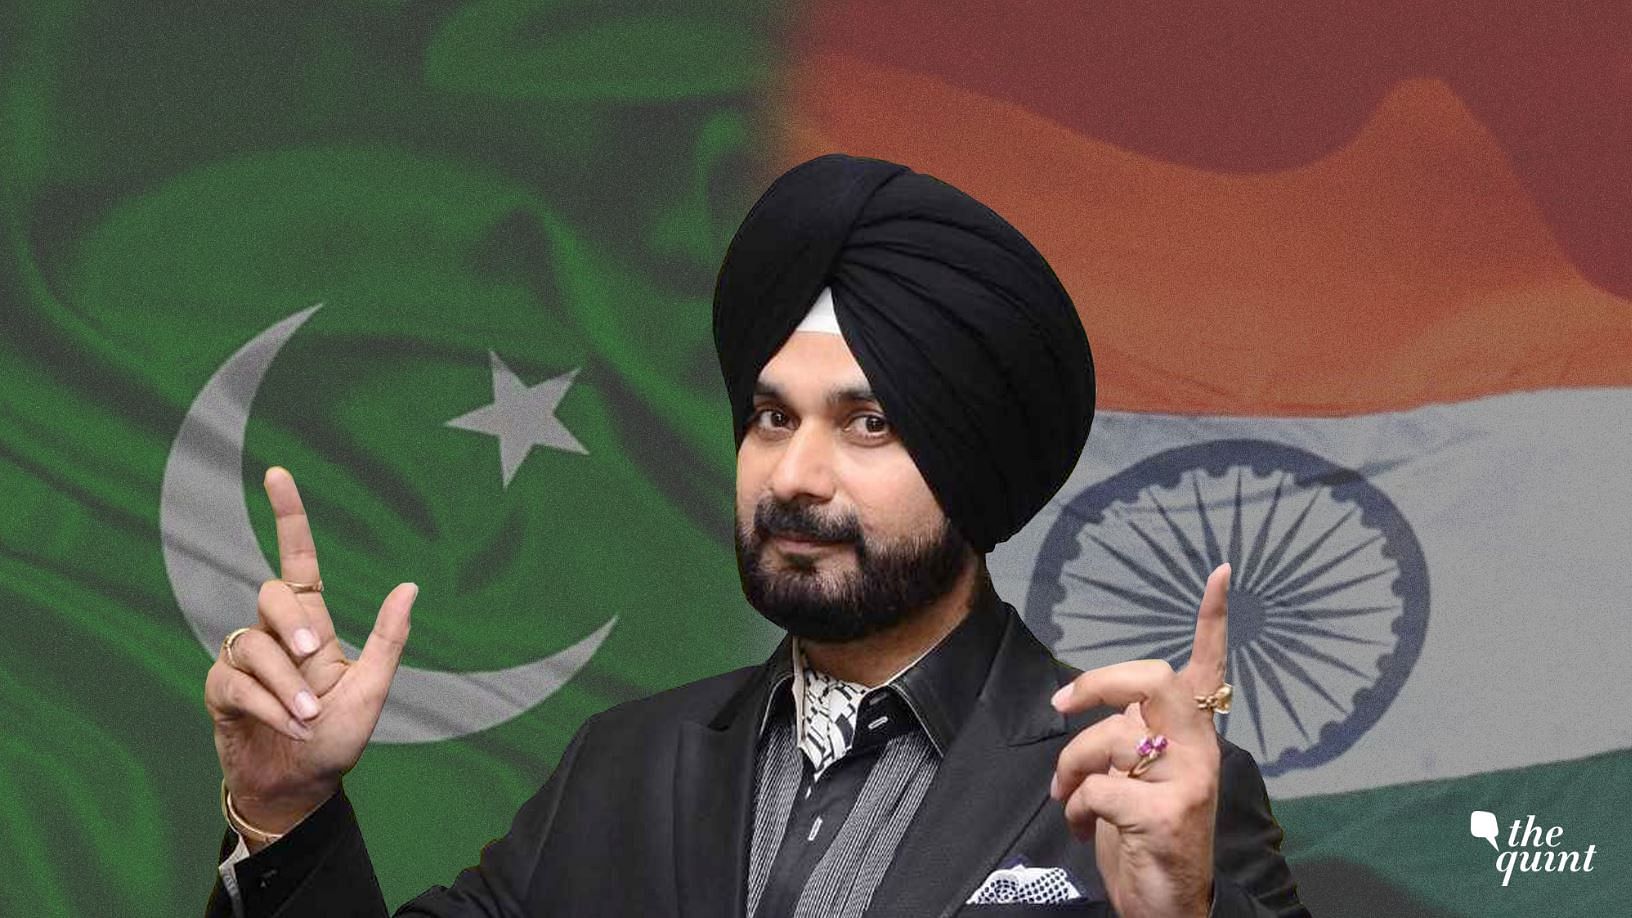 Sidhu, referring to Pakistan, had said that an entire nation cannot be blamed because of a handful of people.